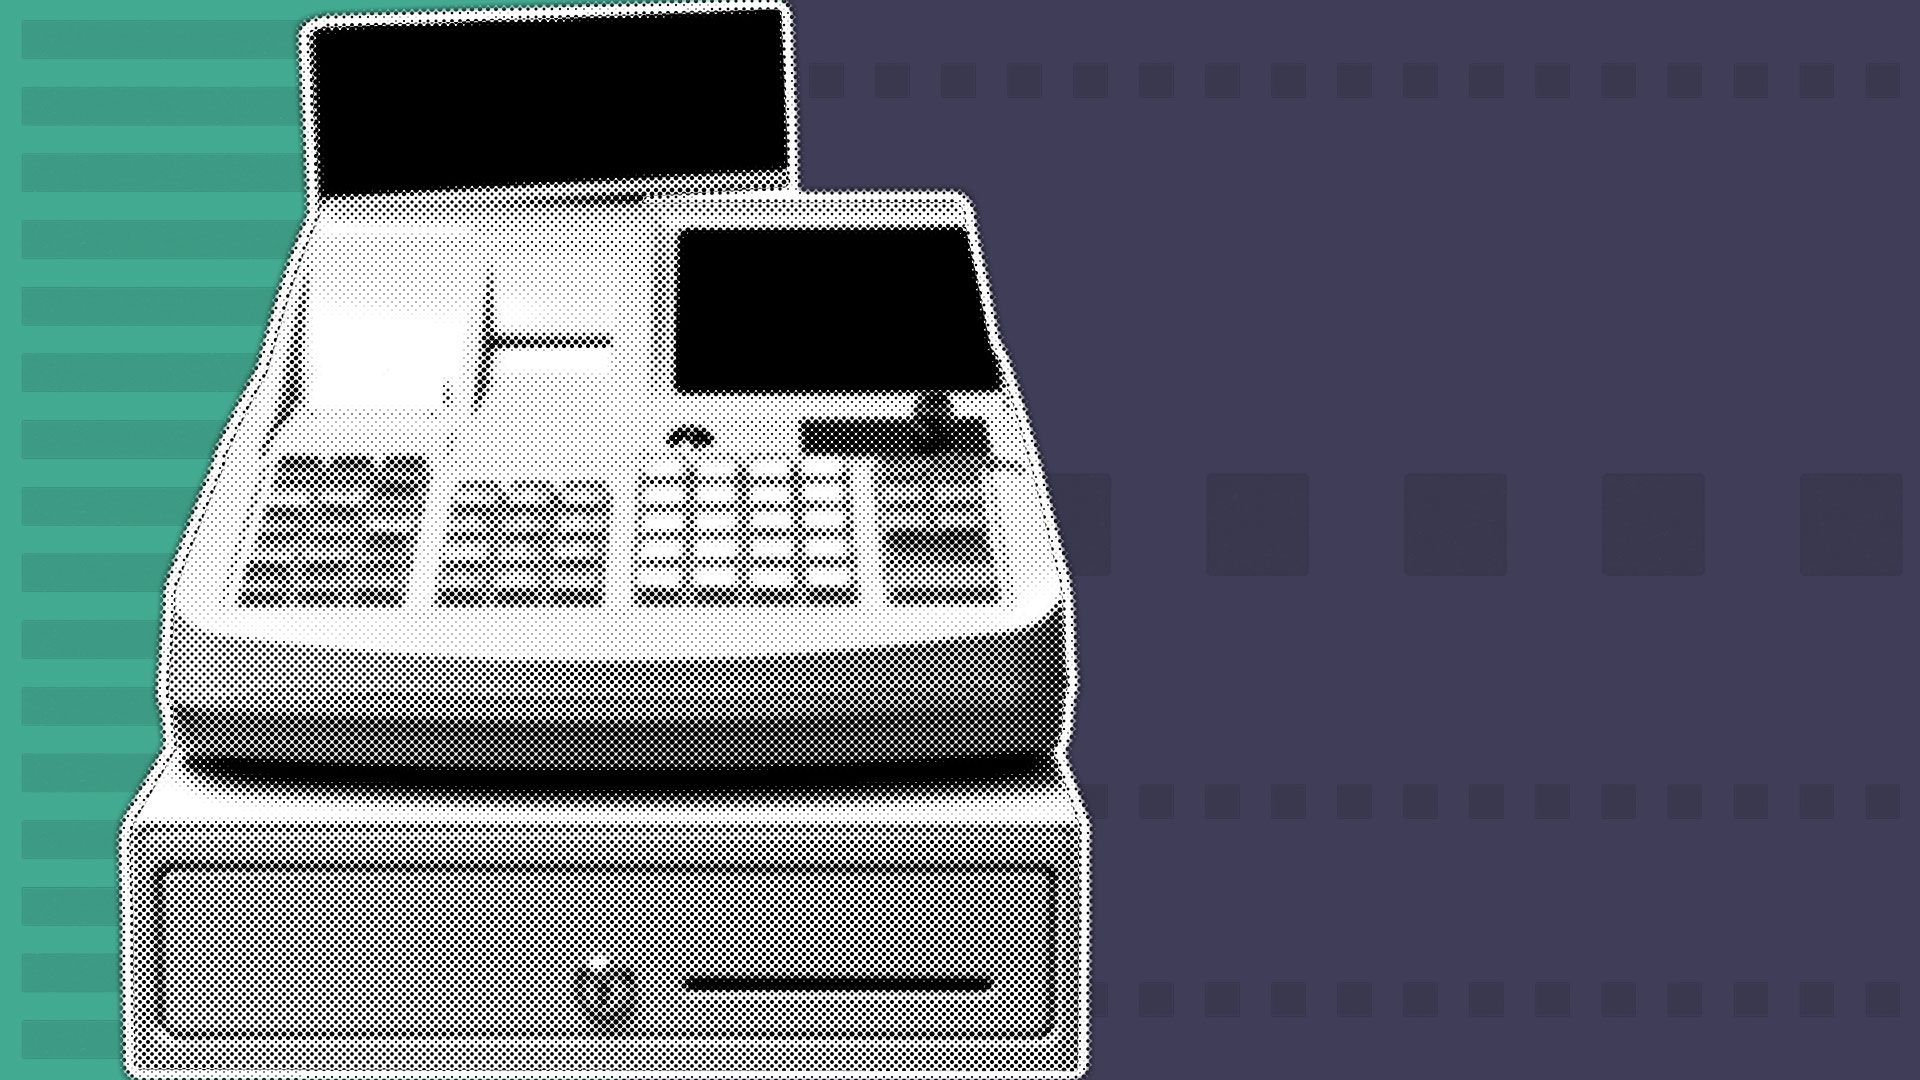 Illustration of a cash register surrounded by ballot shapes.